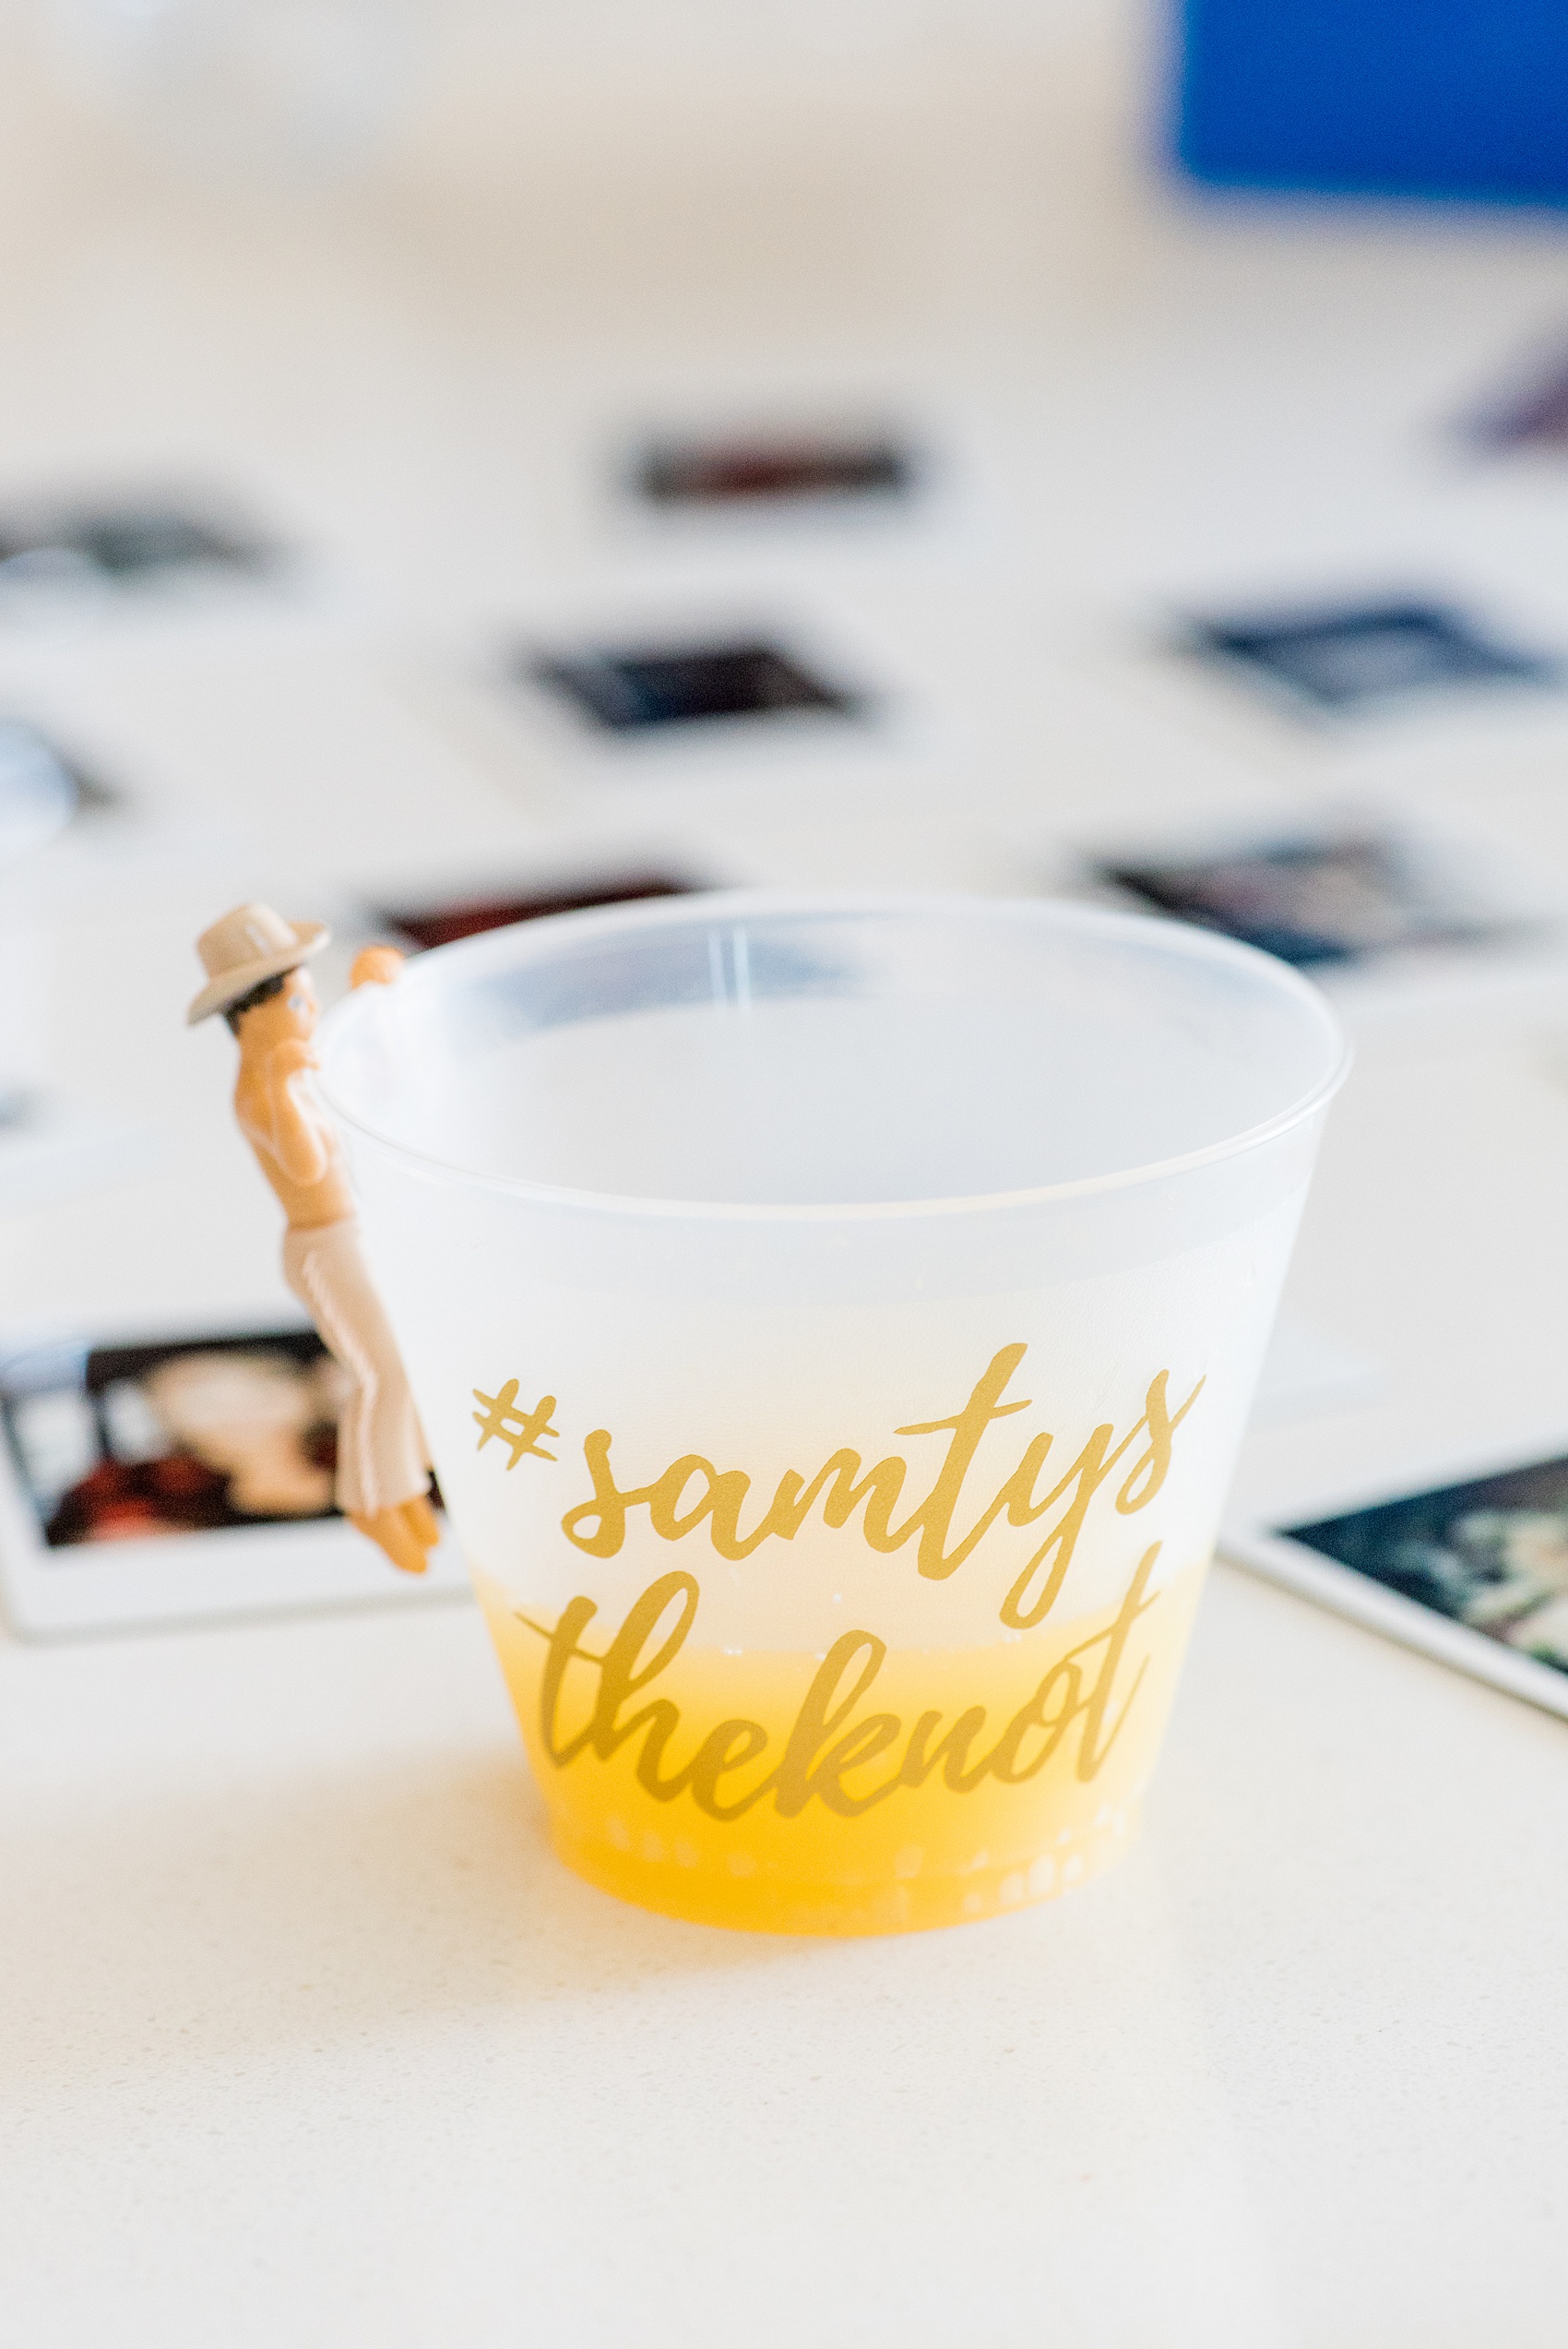 Saratoga Springs destination wedding photos by Mikkel Paige Photography. The bridal party got ready at the Pavilion Grand hotel with Polaroid photo fun and custom hashtag cups. #SaratogaSpringsNY #SaratogaSprings #mikkelpaige #NYwedding #destinationwedding 